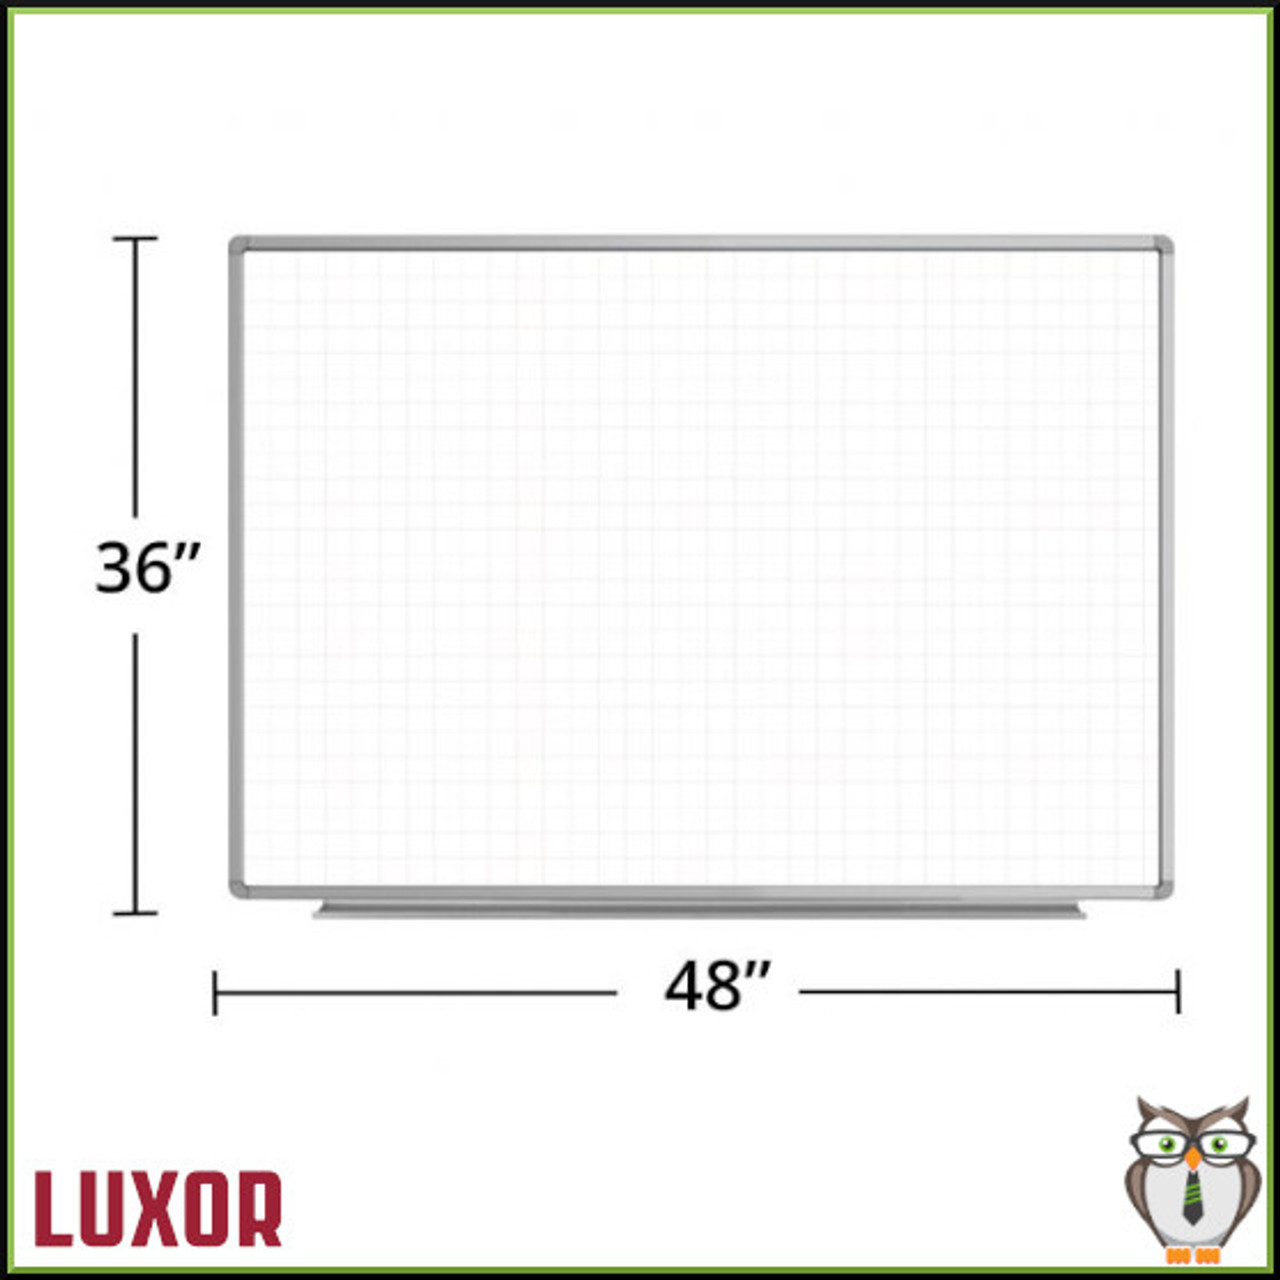 48"W x 36"H Wall-Mounted Ghost Grid Whiteboard (WB4836LB) - Dimensions